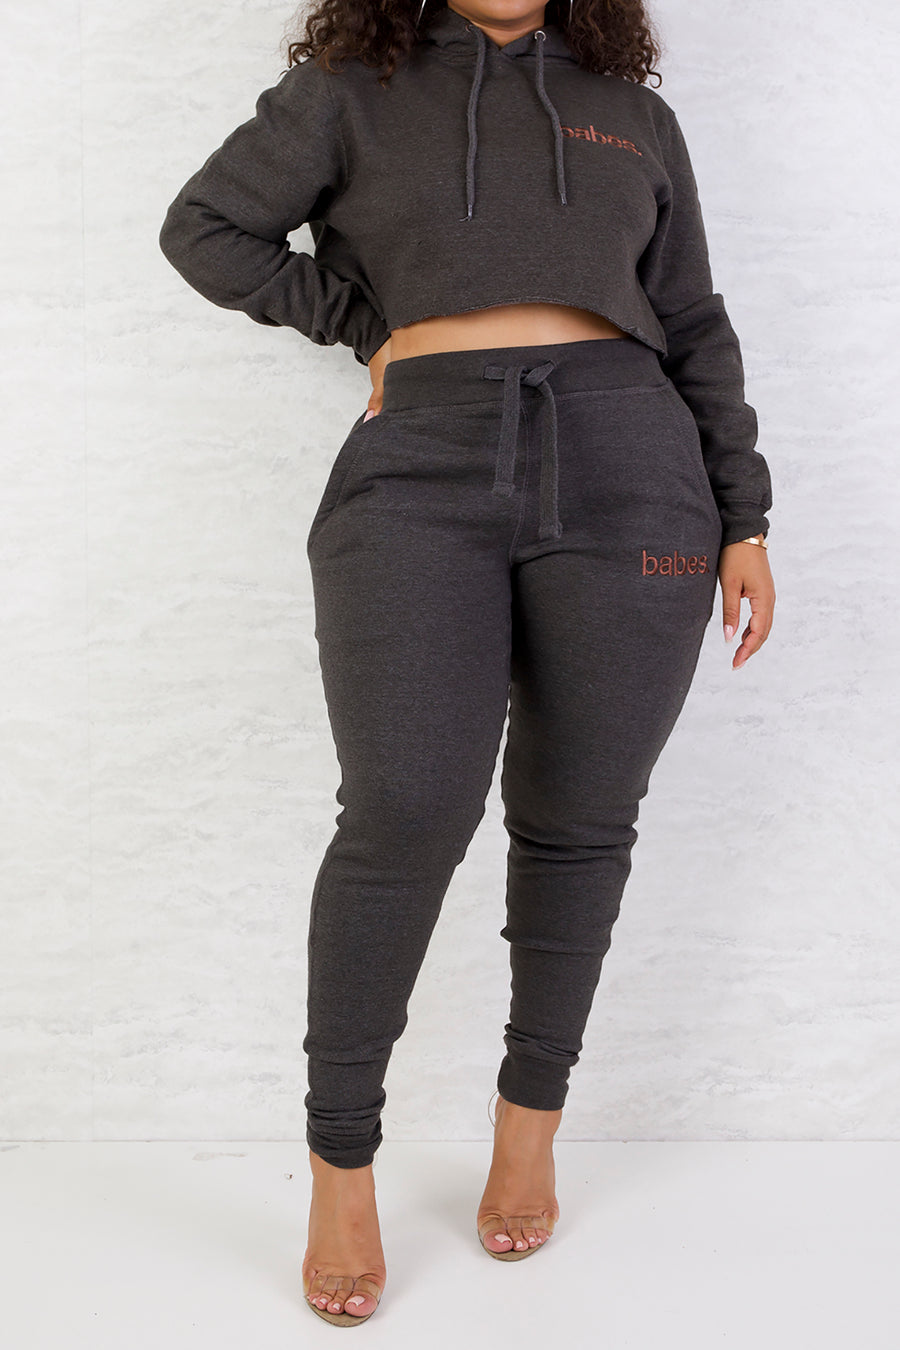 "Charcoal" Babes Comfy Hoodie